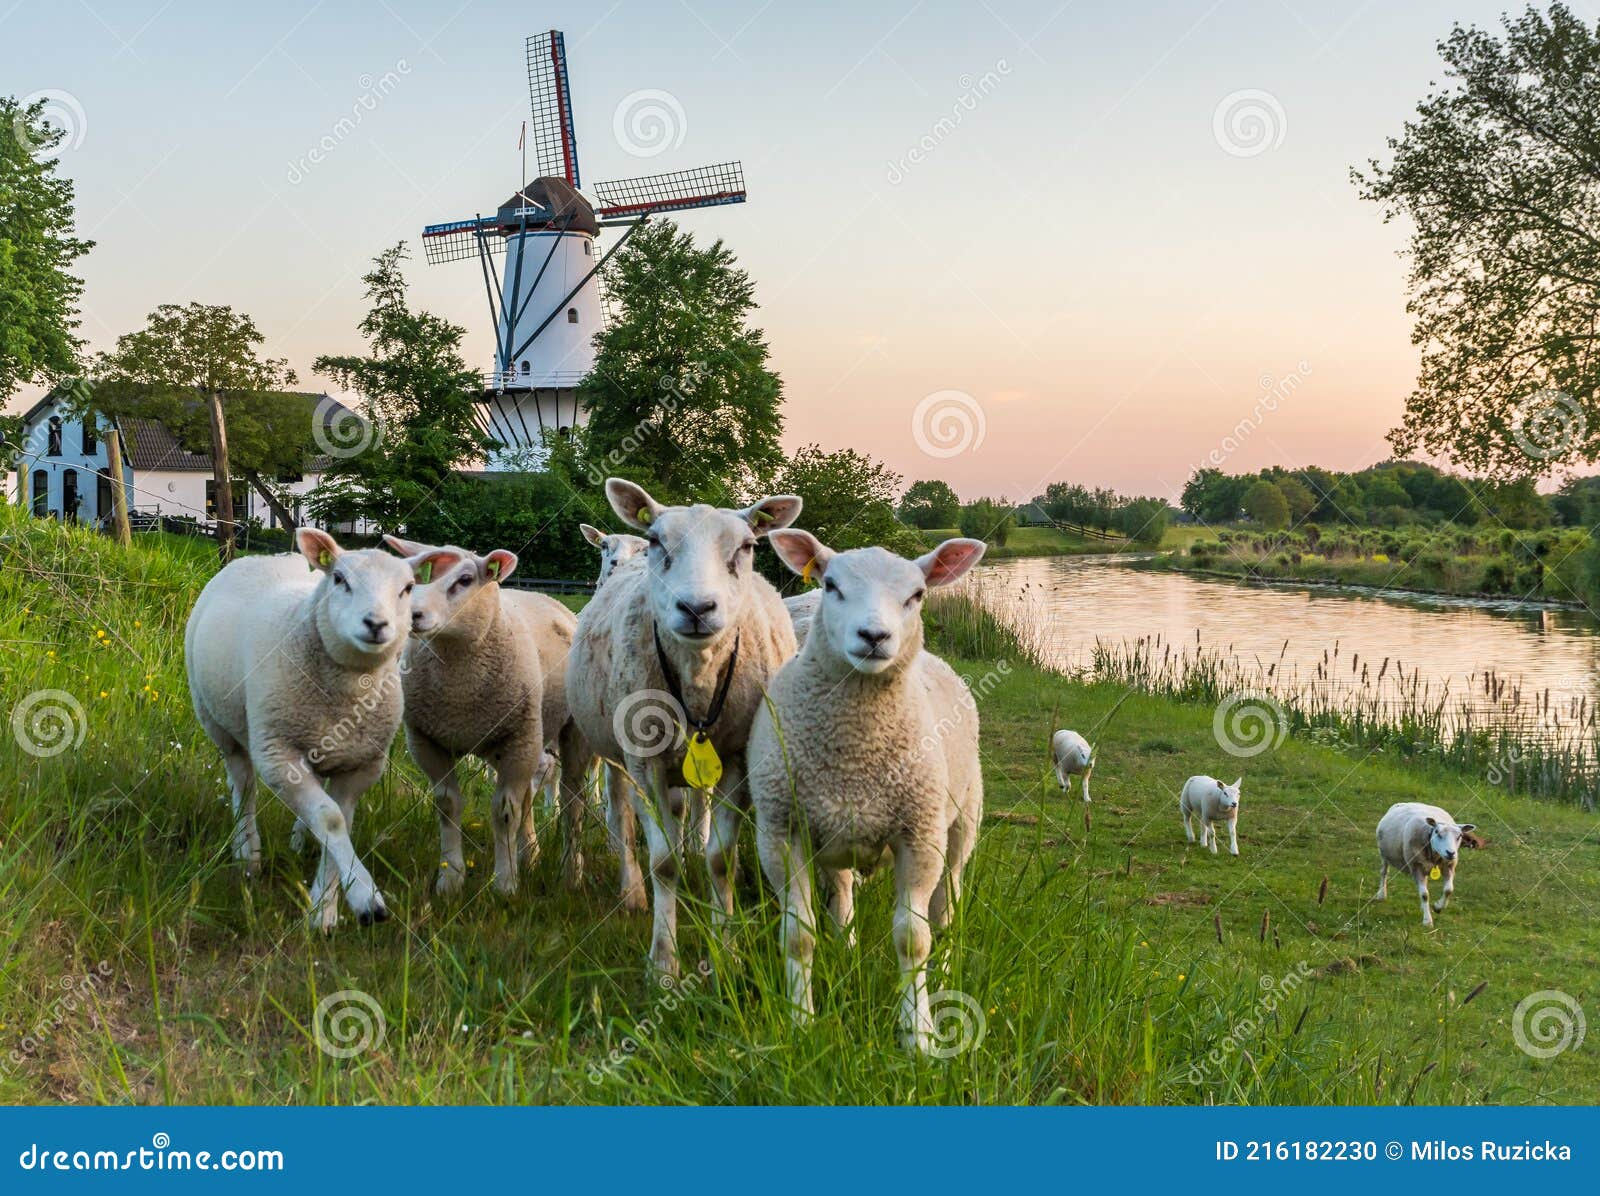 scenery with a traditional dutch windmill called `de vlinder` and a flock of sheep in deil, province of gelderland, the netherland